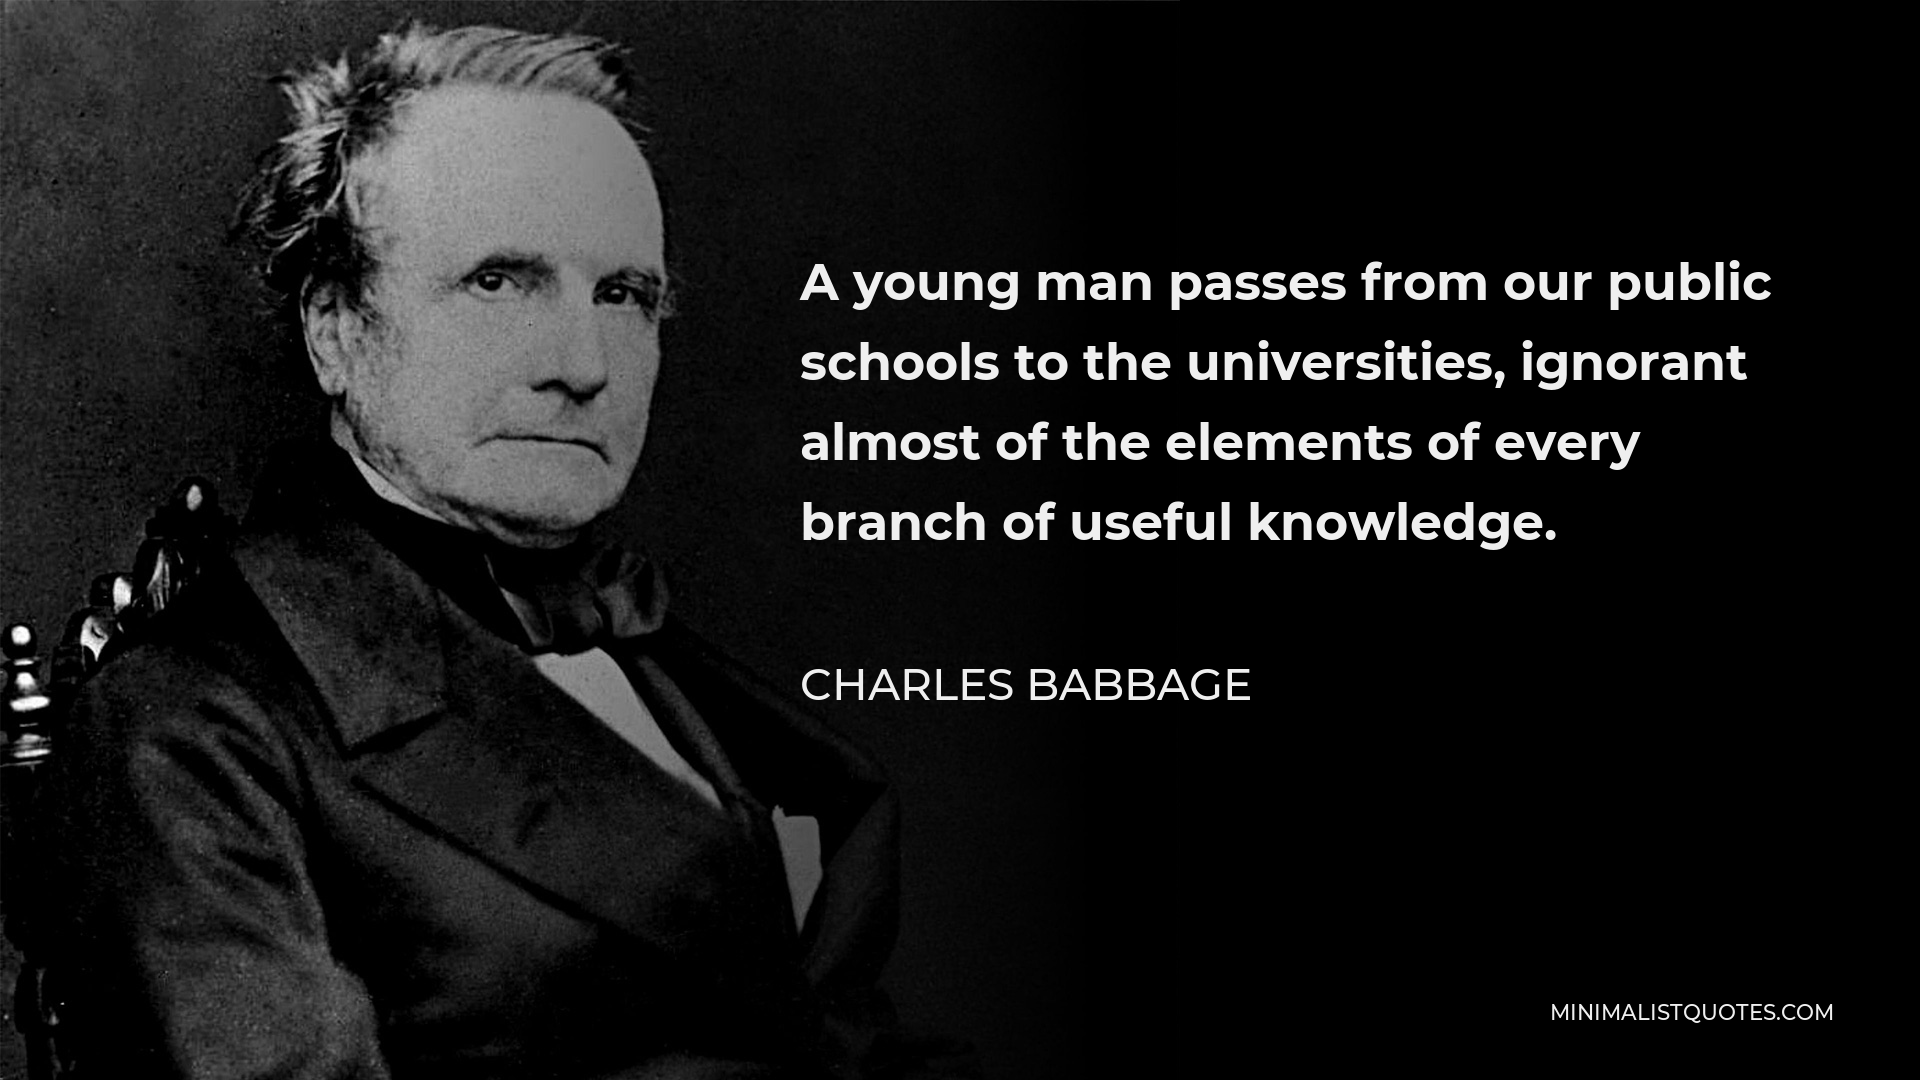 Charles Babbage Quote - A young man passes from our public schools to the universities, ignorant almost of the elements of every branch of useful knowledge.